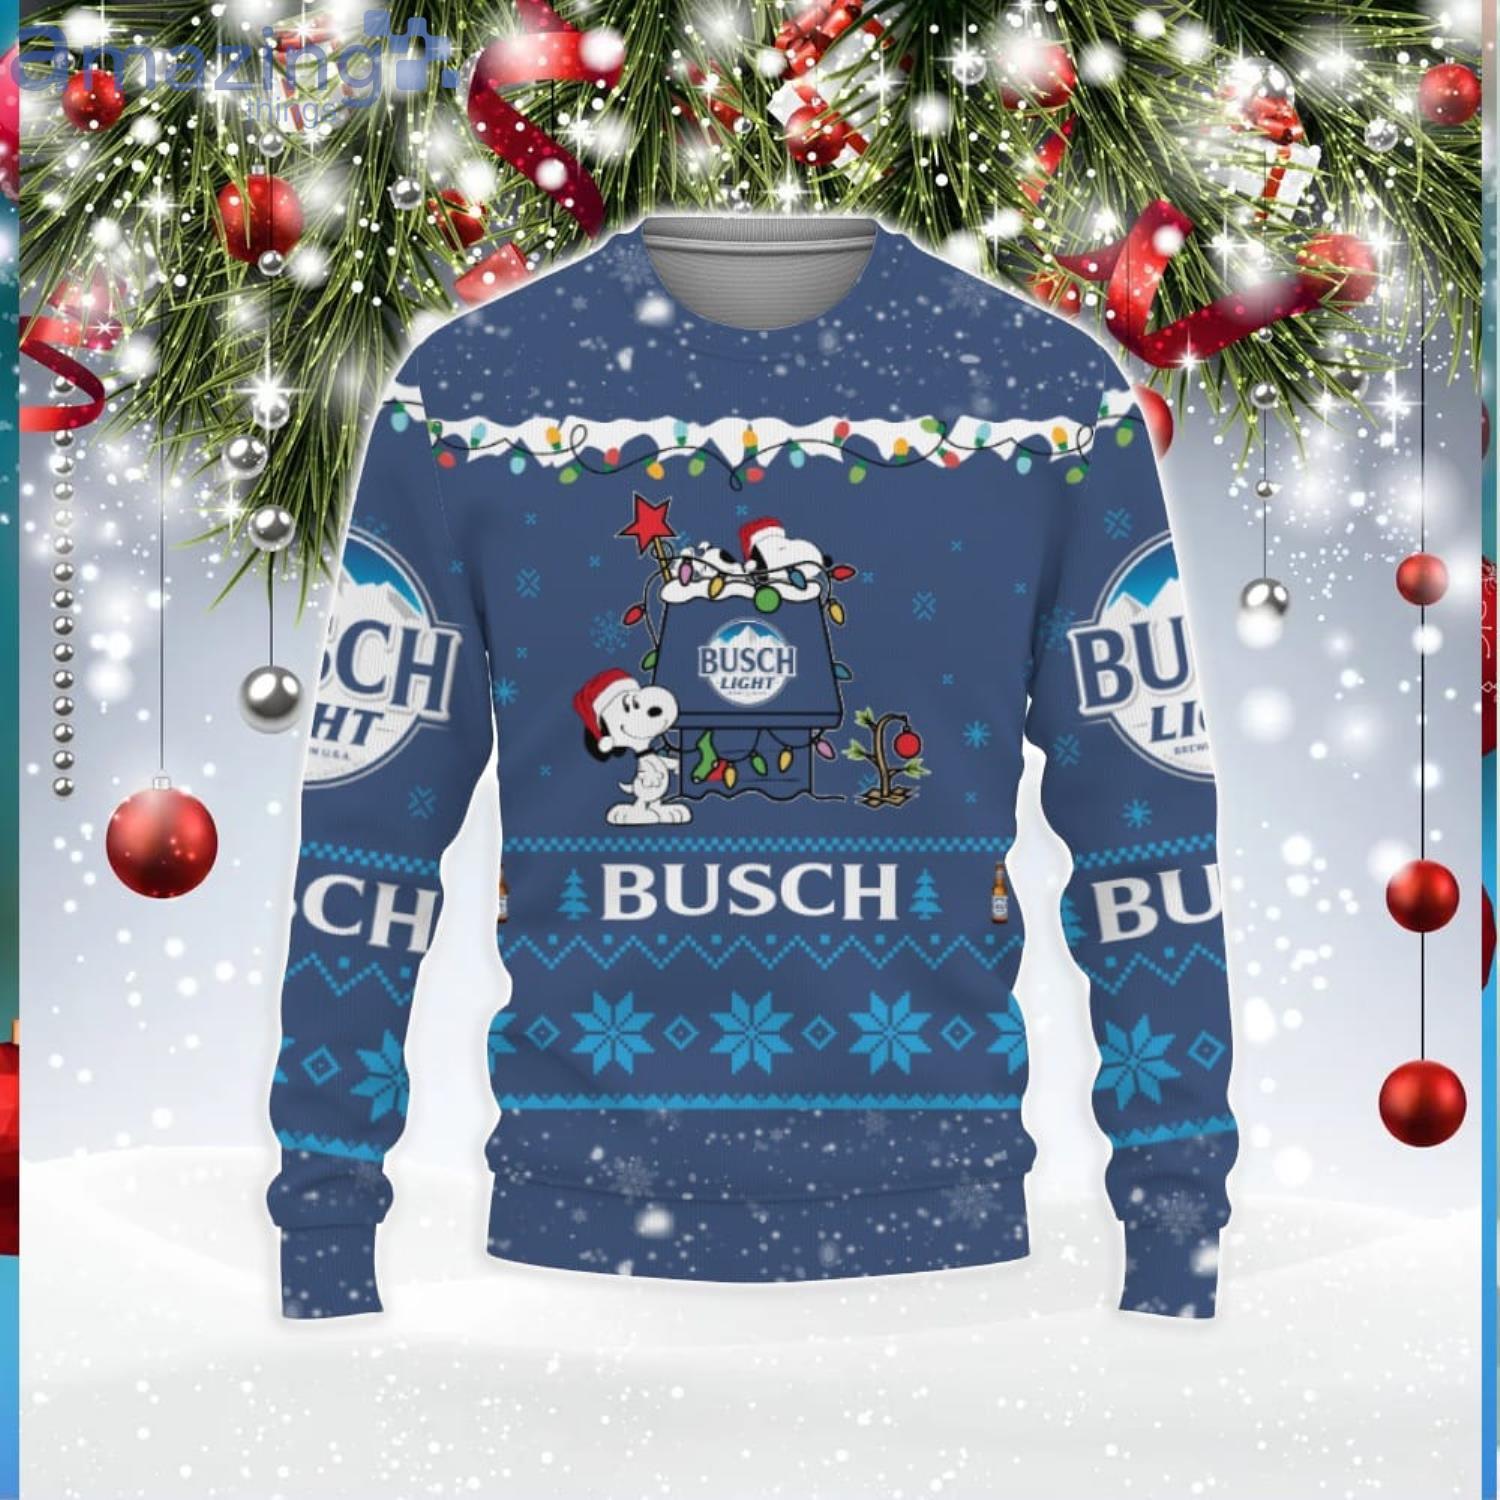 Busch Light Beers American Whiskey Beers Merry Christmas Snoopy House Cute Gift 3D Ugly Christmas Sweater Product Photo 1